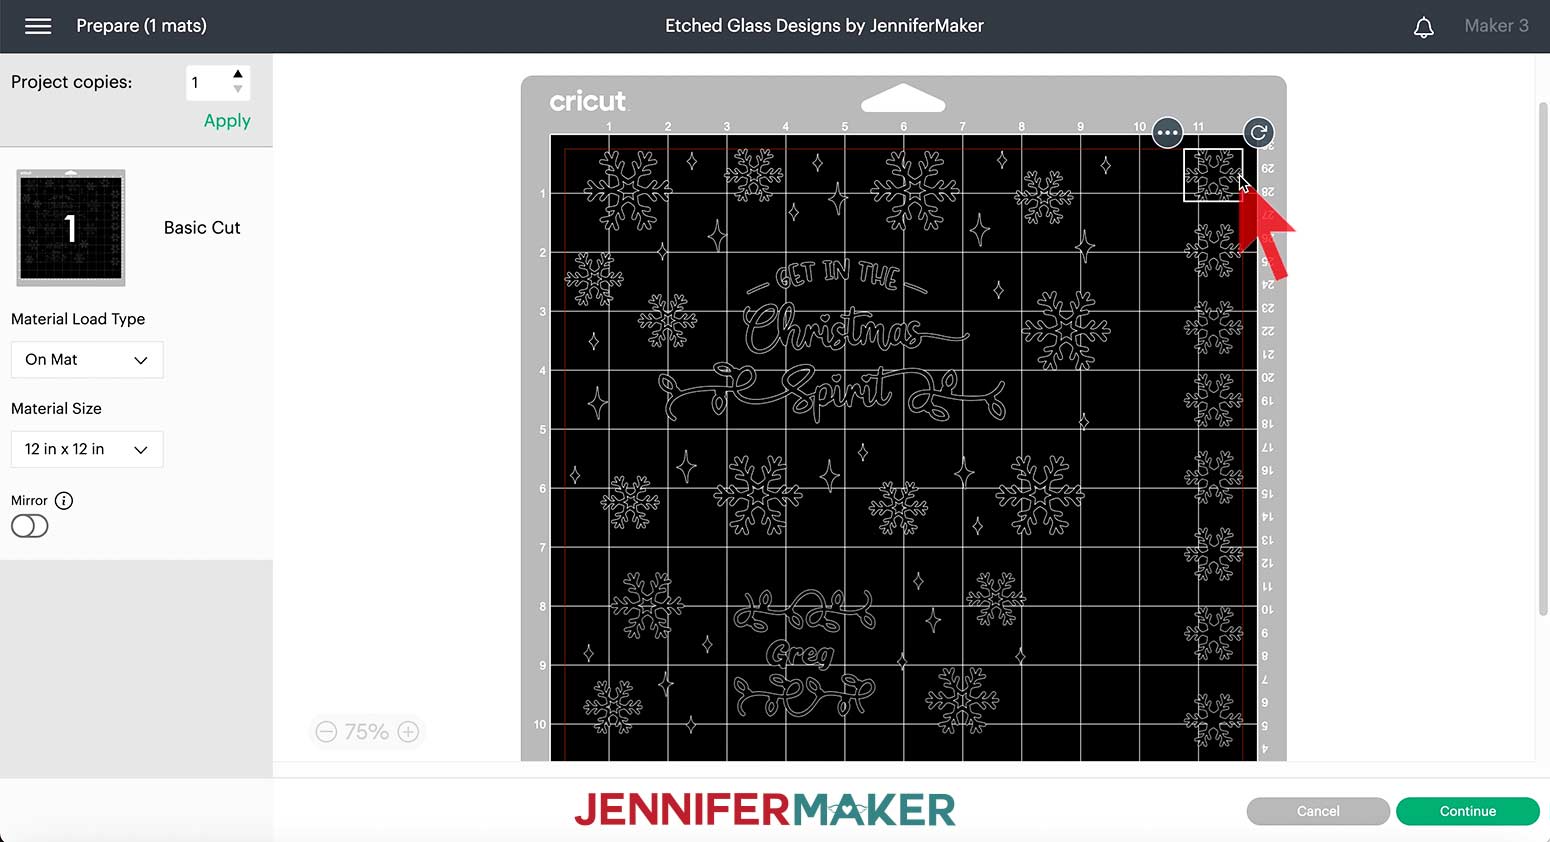 Move the bottle design, glass design, and additional snowflakes on your mat apart from each other in Design Space before cutting your etched wine glasses and bottles designs